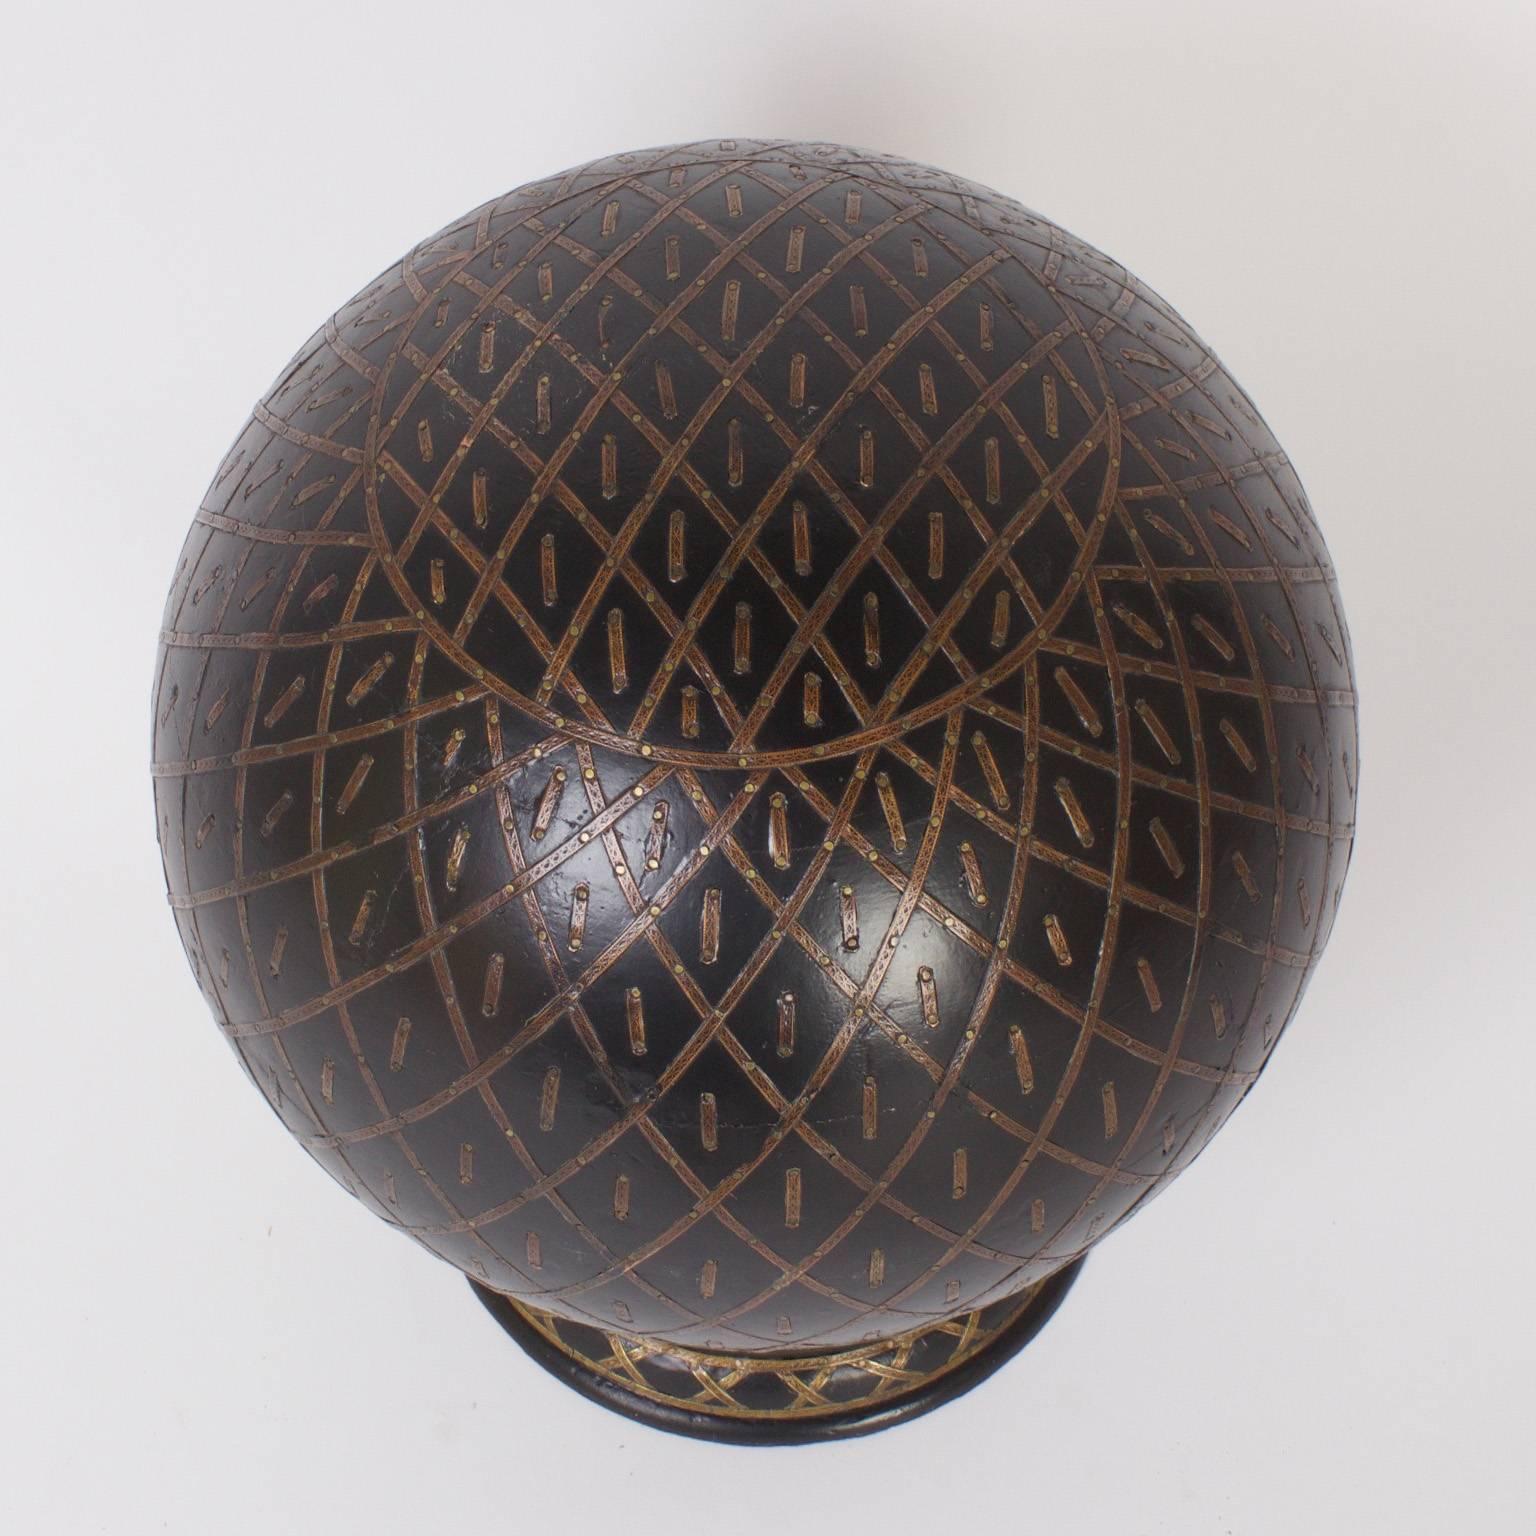 Unusual, vintage Anglo-Indian globe or orb crafted in ebonized wood and decorated in an elaborate well thought painted pattern. Presented on a classic brass clad stand.
  